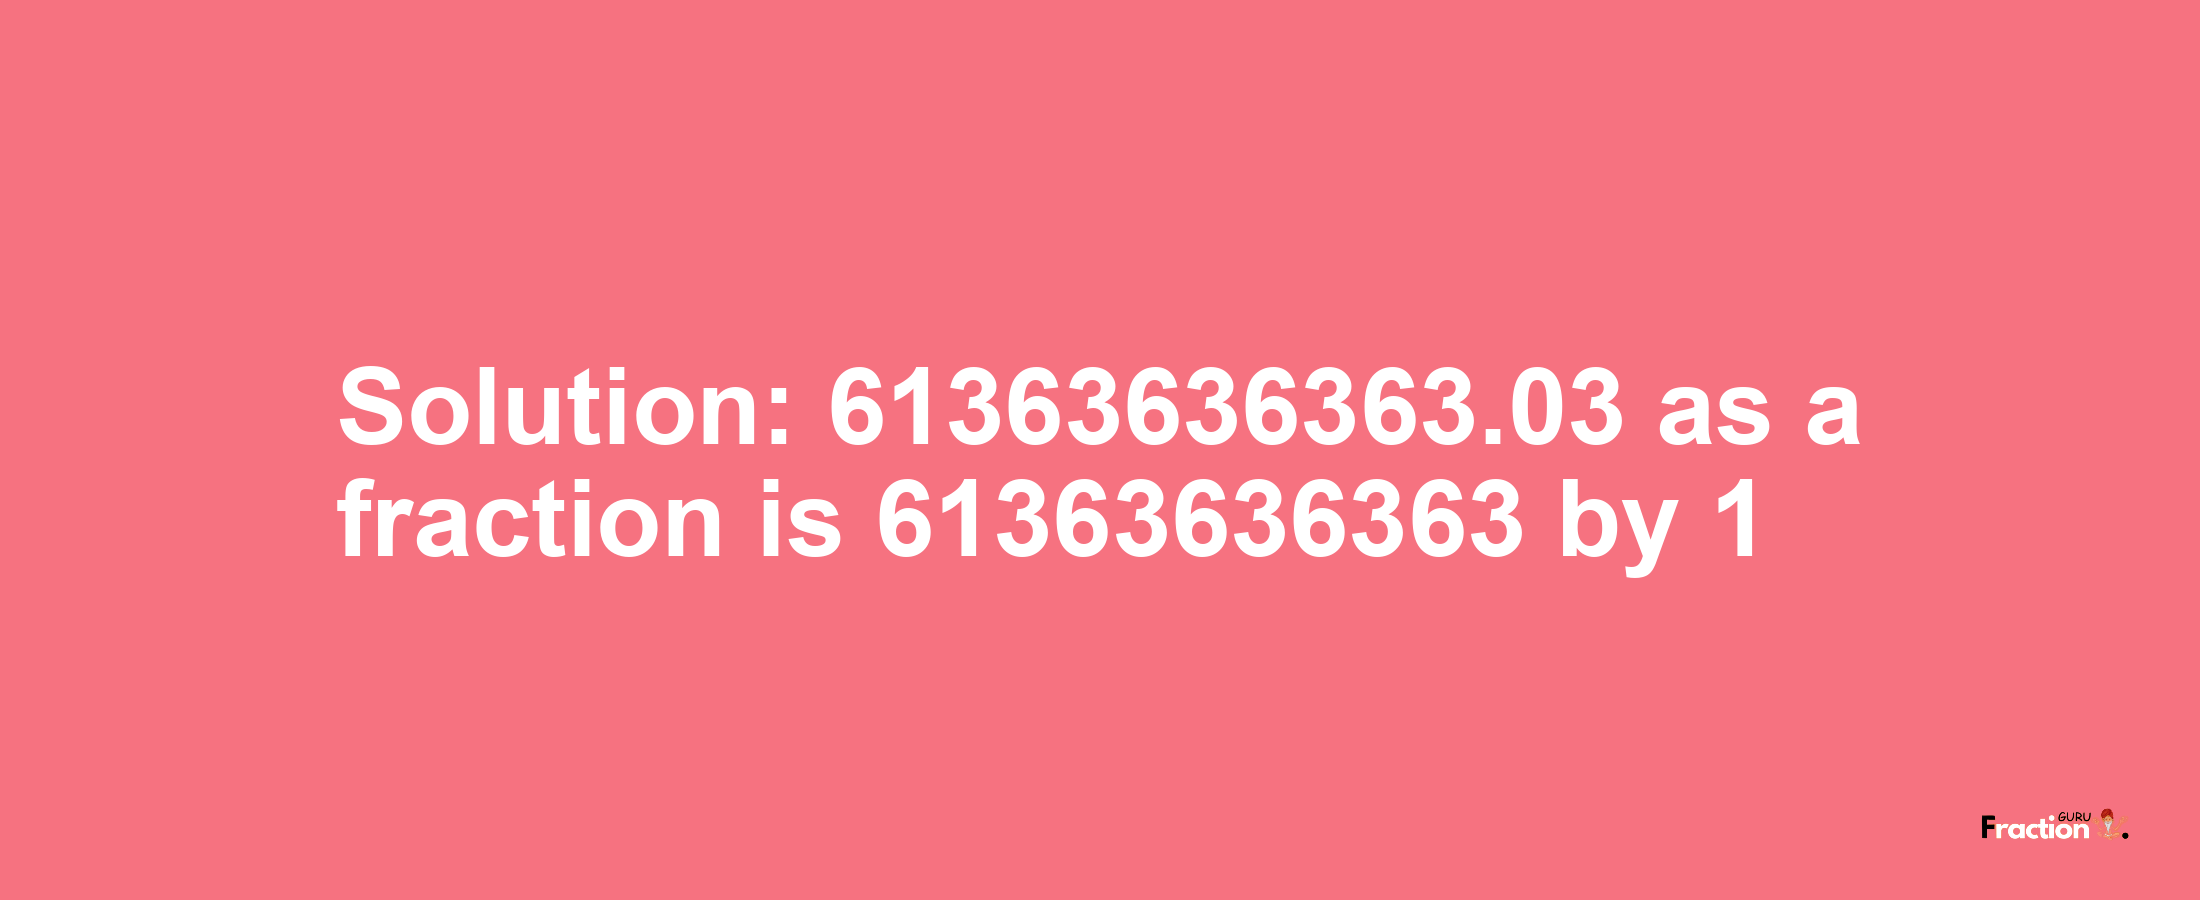 Solution:61363636363.03 as a fraction is 61363636363/1